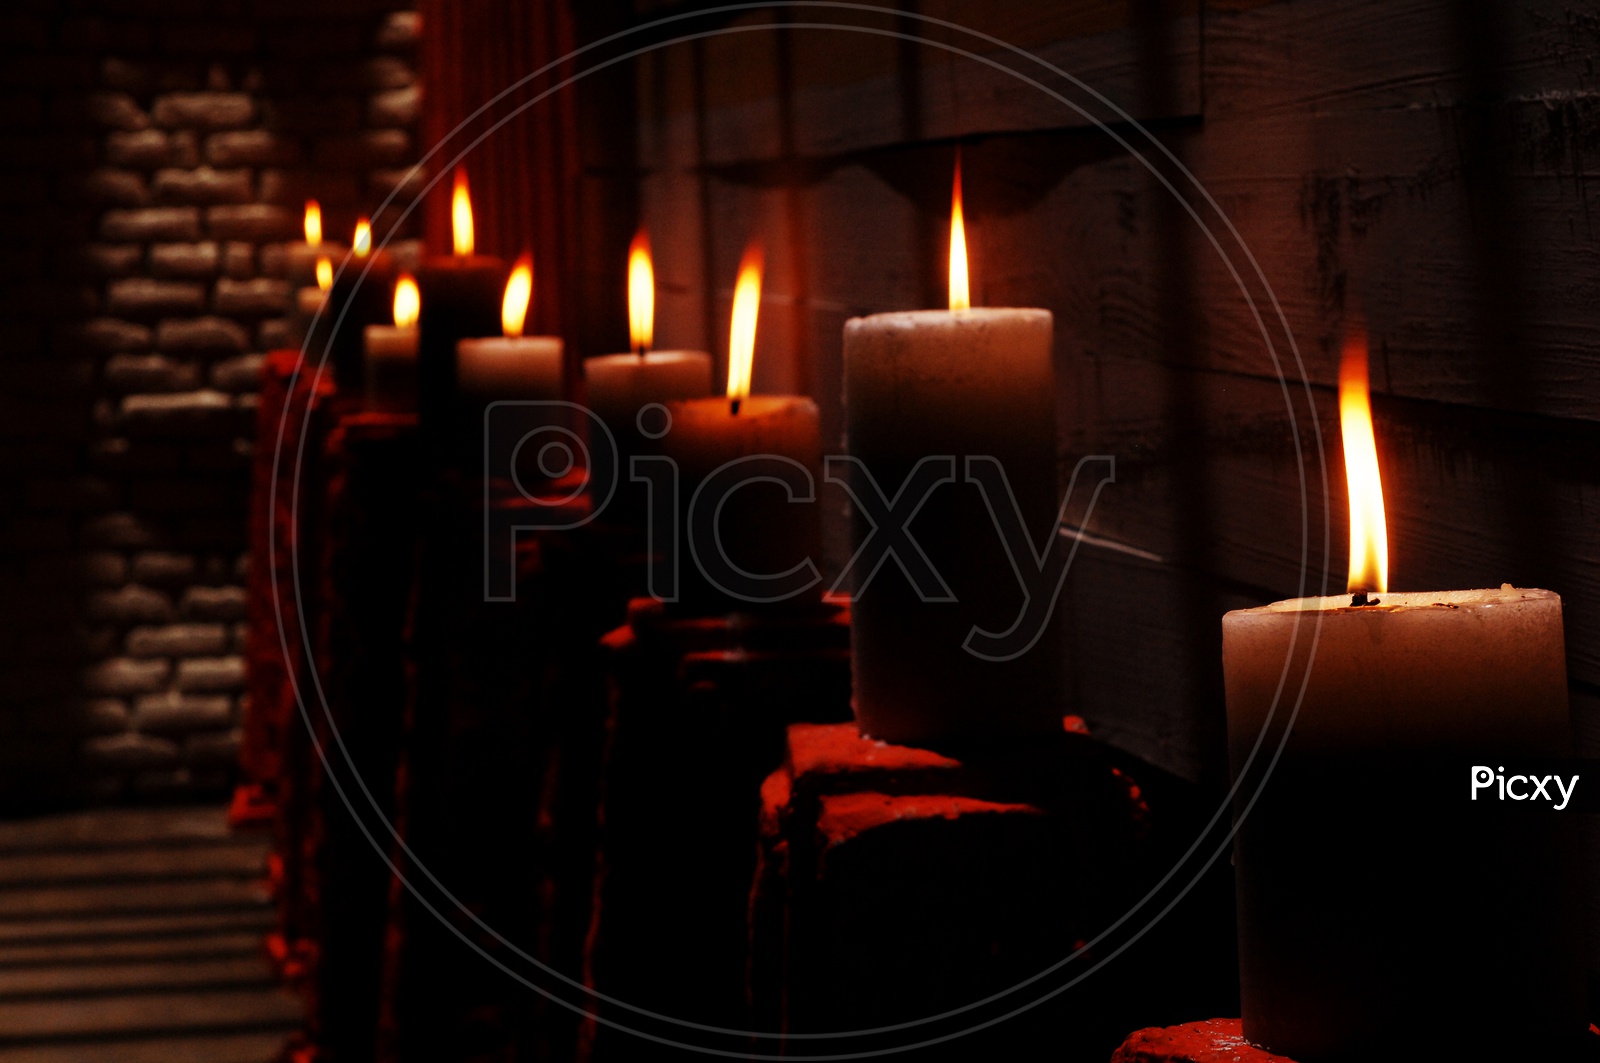 Wax Candle Lighted In Dark